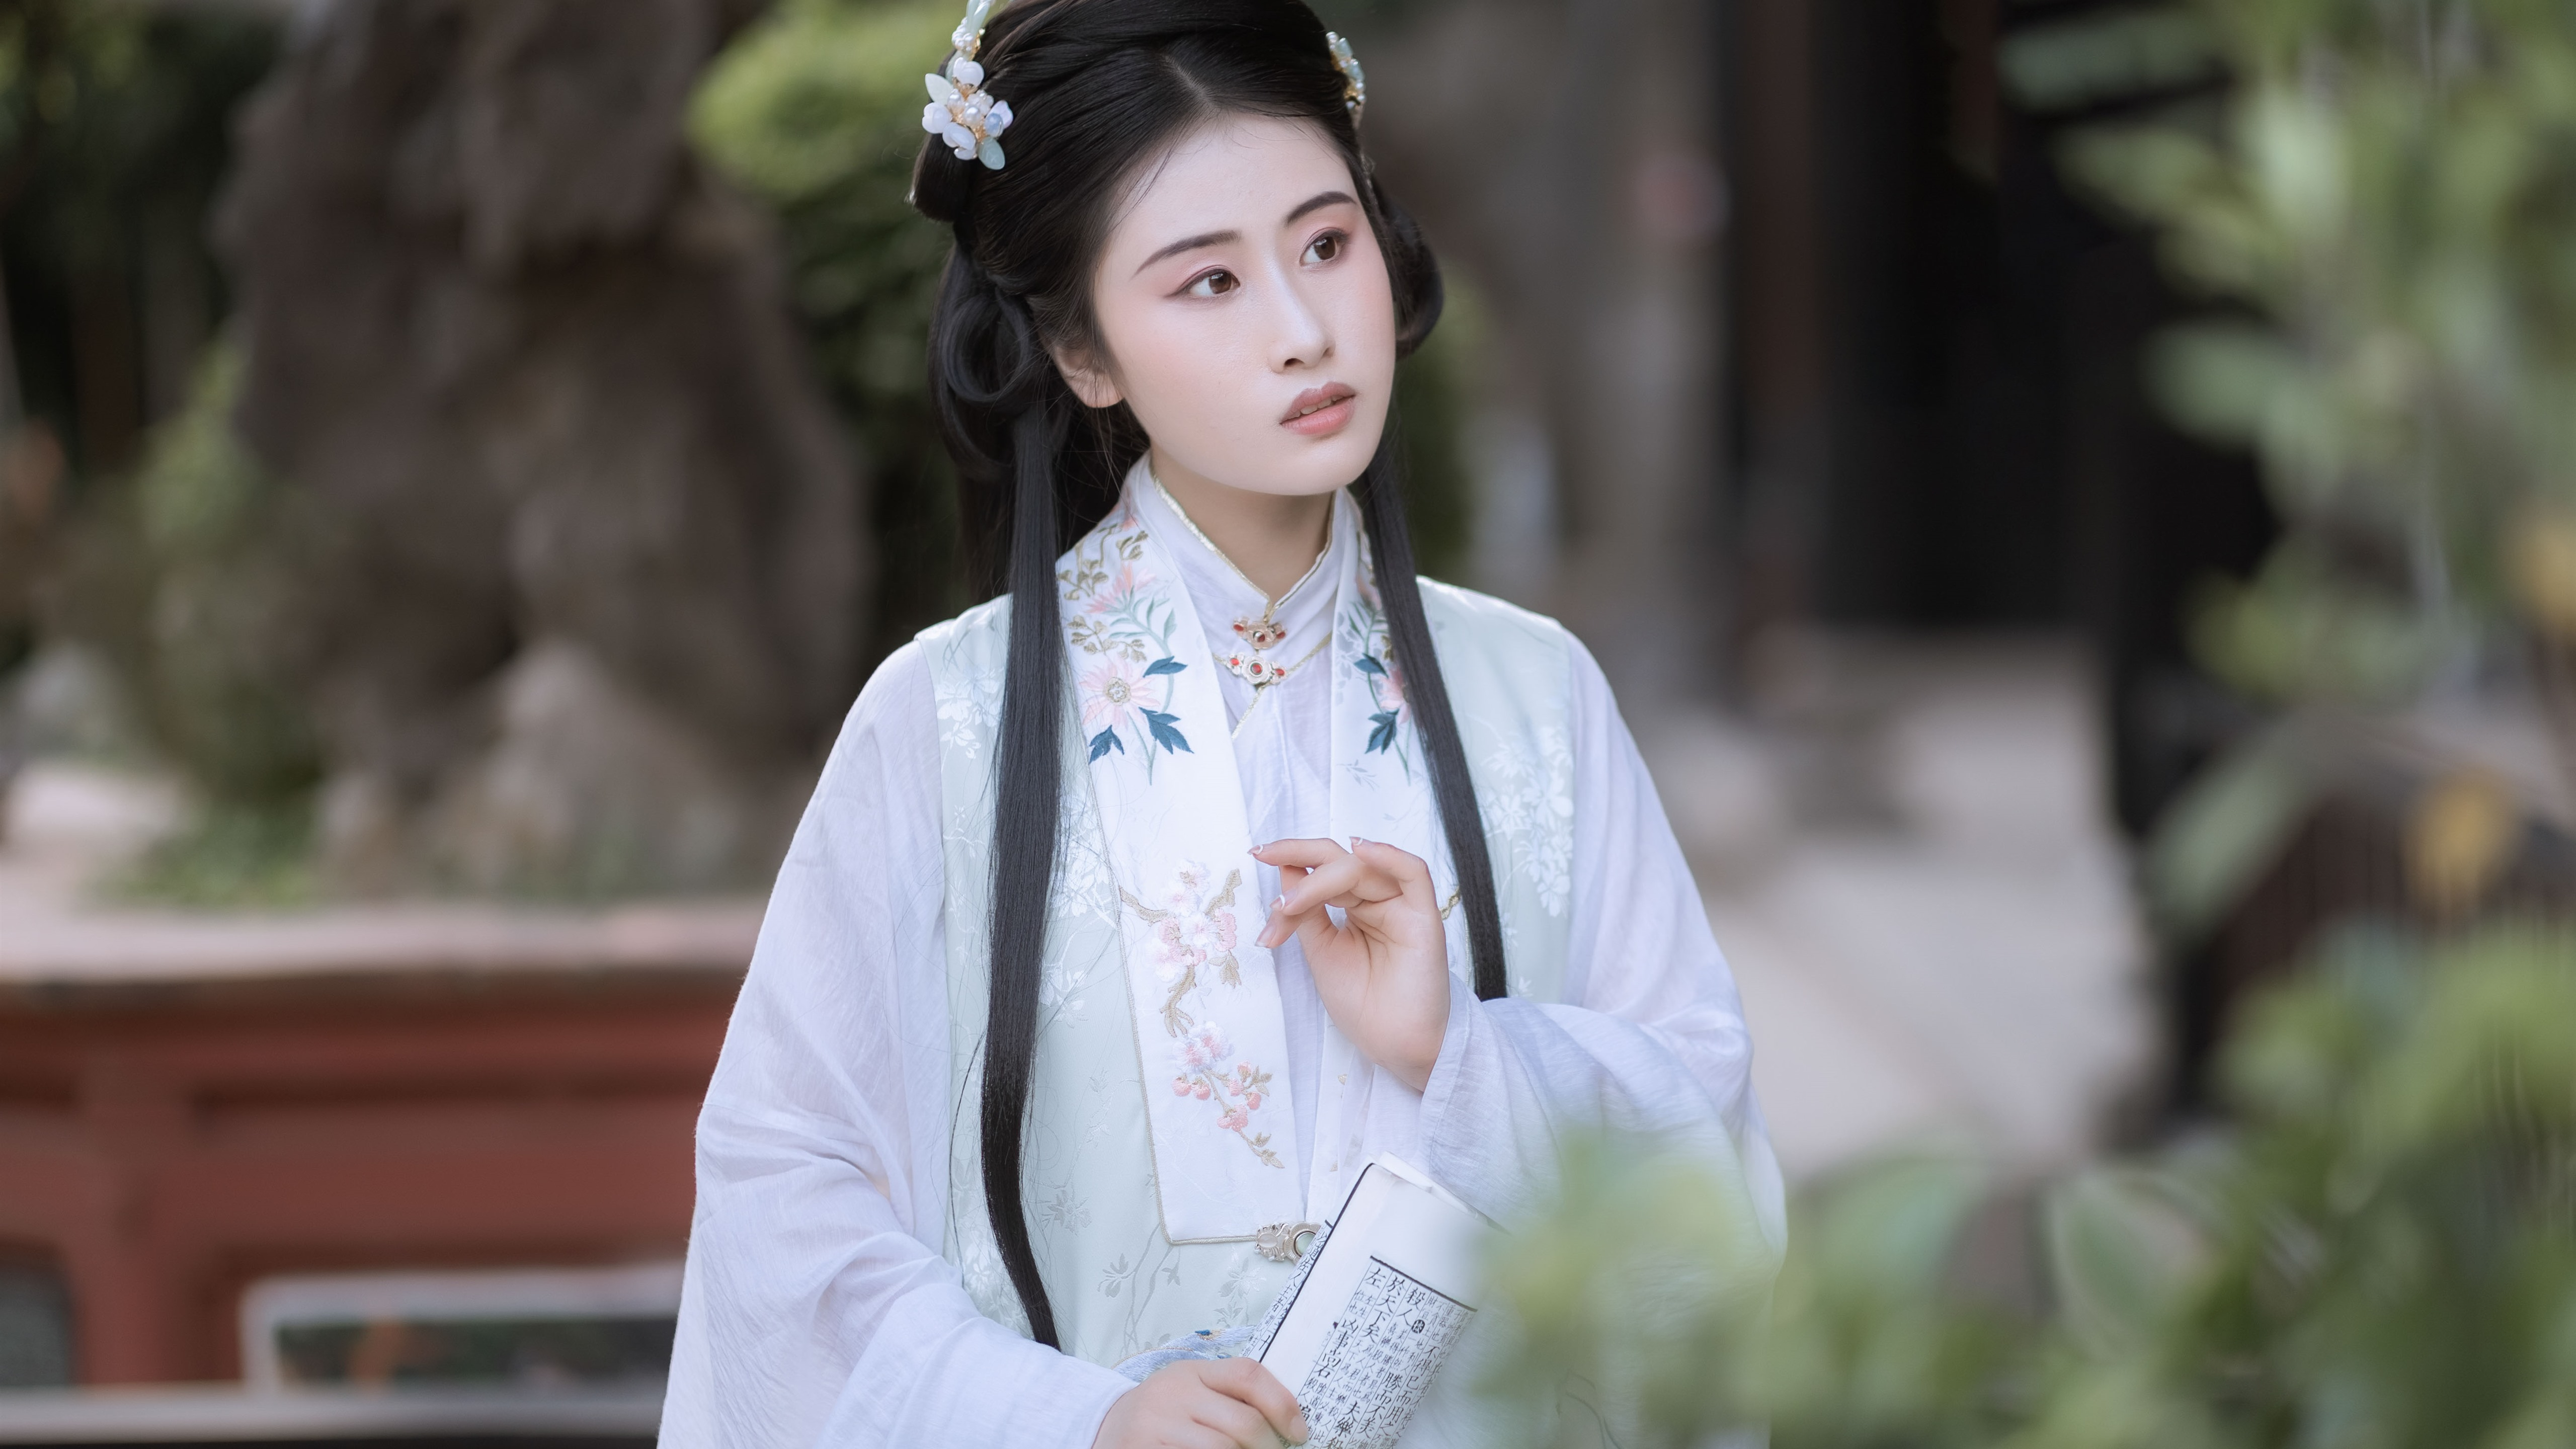 Wallpapers wallpaper pretty chinese girl historical traditional chinese outfit on the desktop